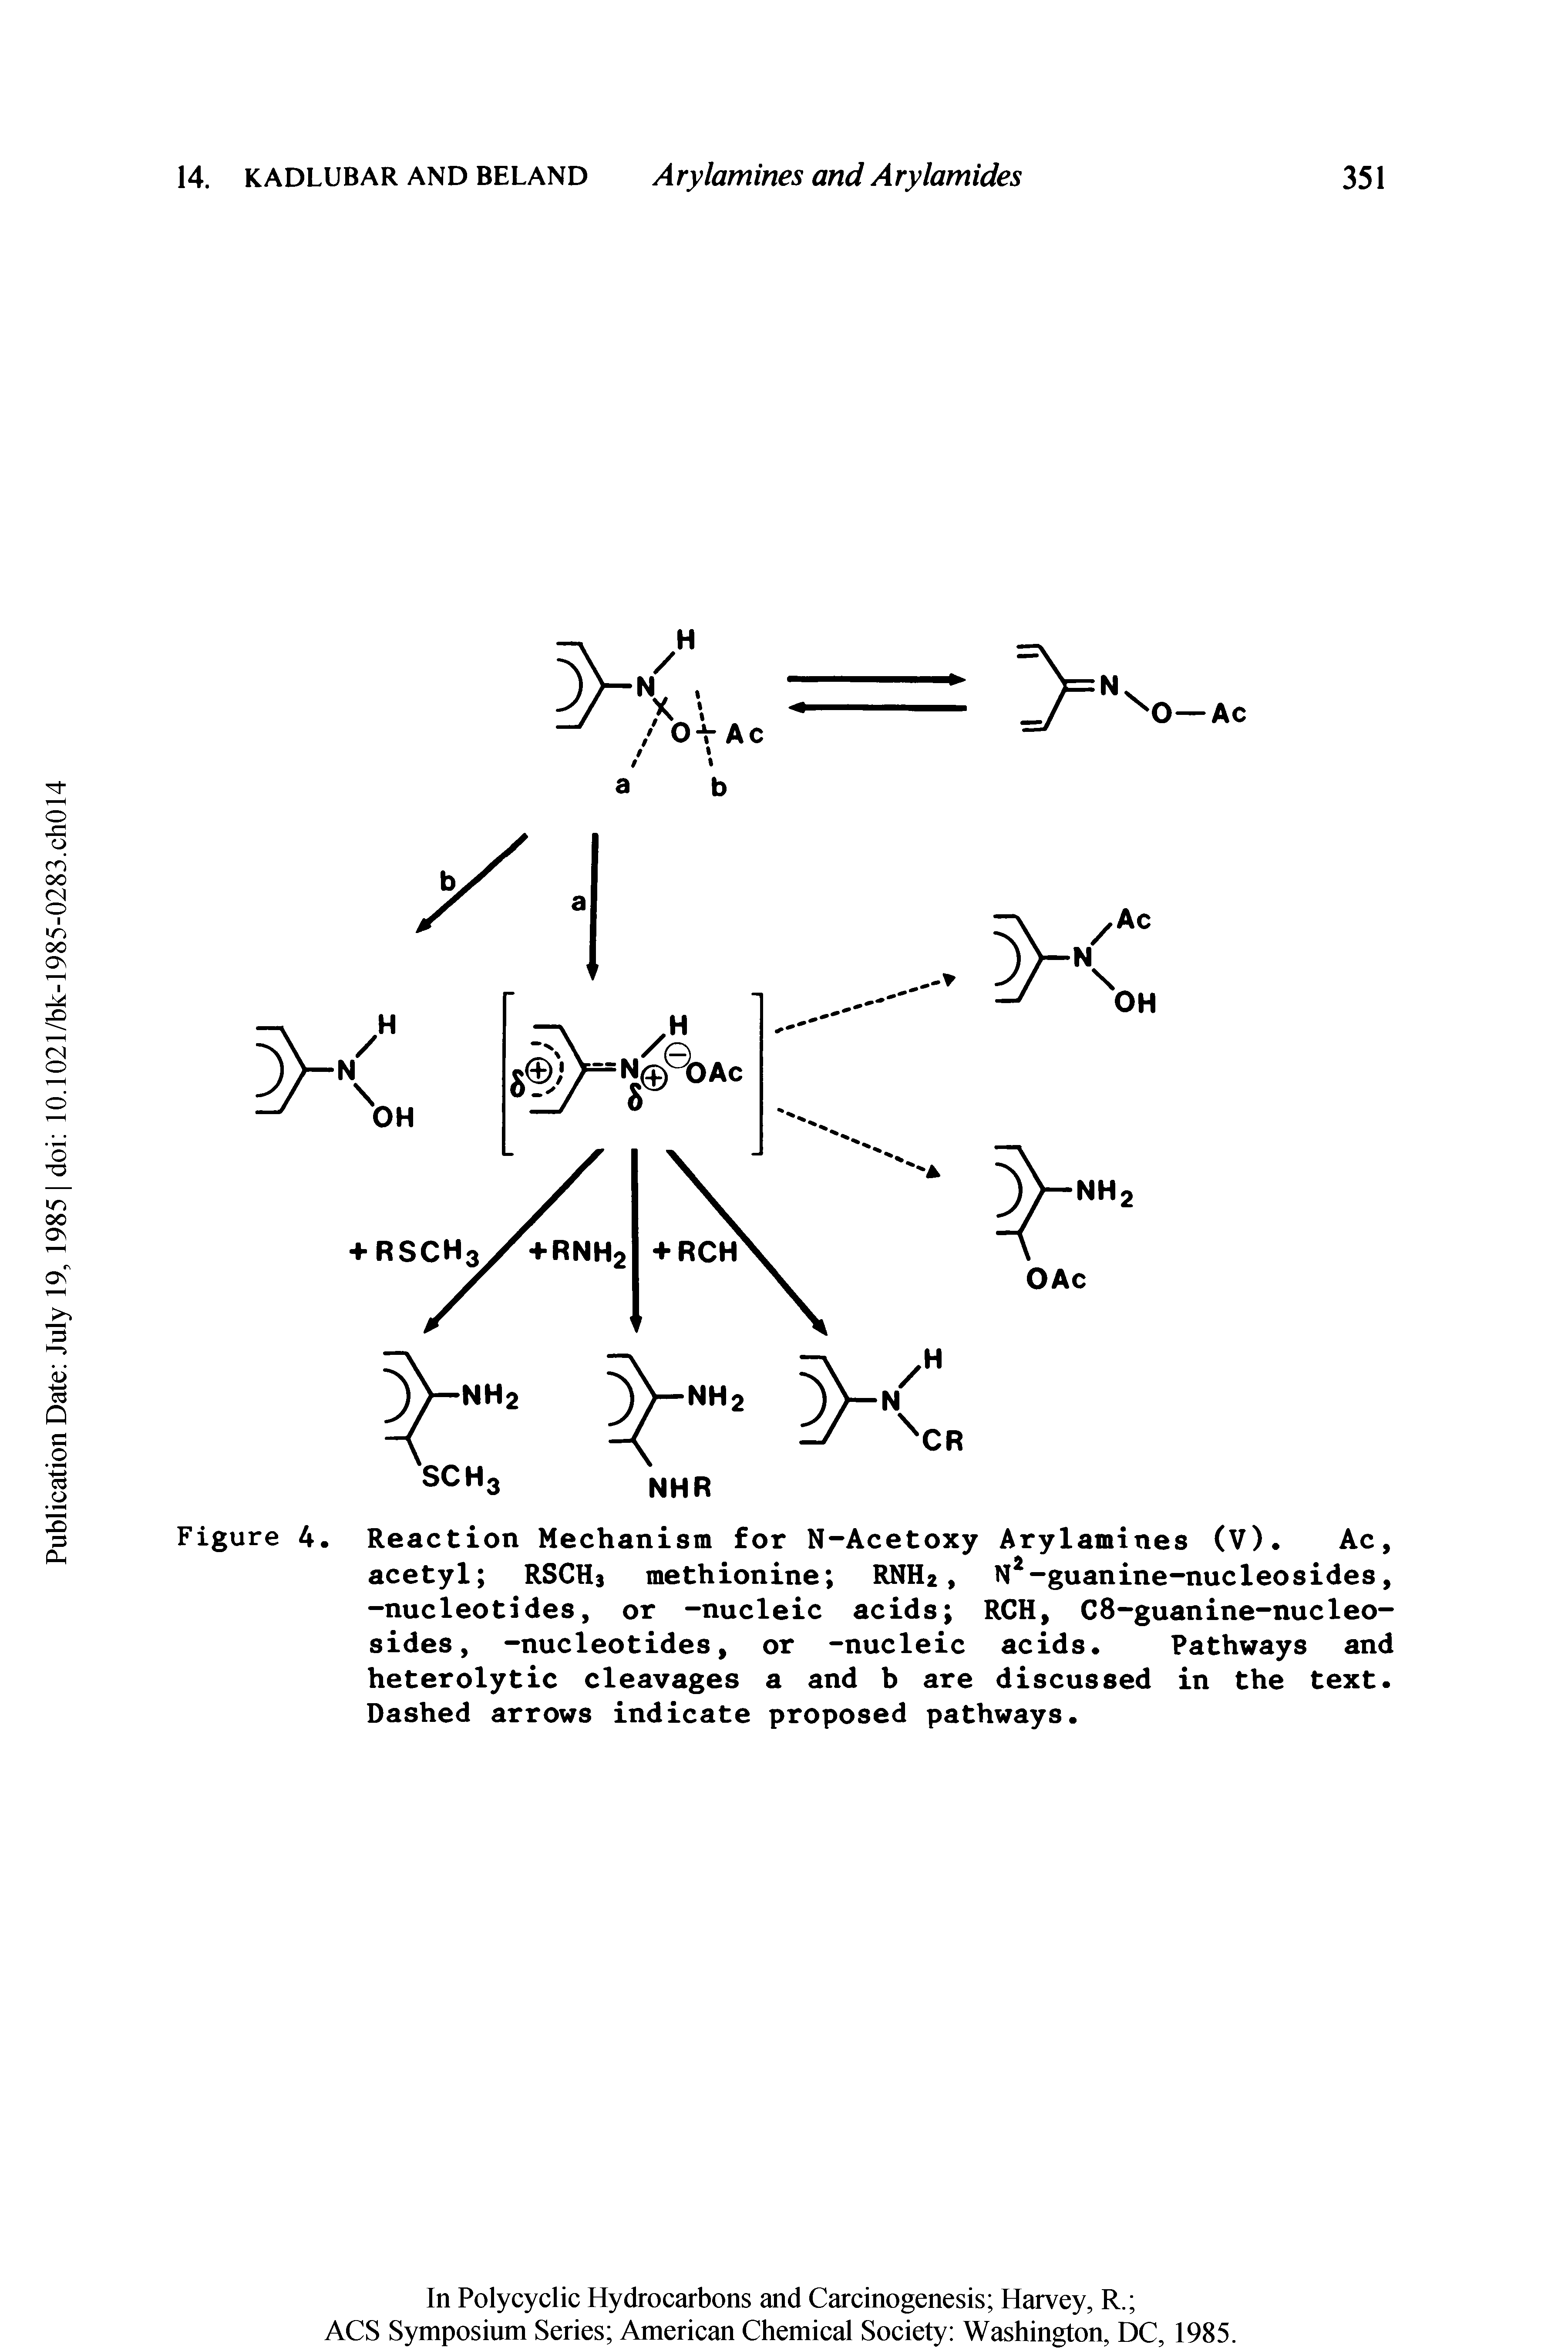 Figure 4. Reaction Mechanism for N-Acetoxy Arylamines (V). Ac, acetyl RSCH3 methionine RNH2, N2-guanine-nucleosides, -nucleotides, or -nucleic acids RCH, C8-guanine-nucleo-sides, -nucleotides, or -nucleic acids. Pathways and heterolytic cleavages a and b are discussed in the text. Dashed arrows indicate proposed pathways.